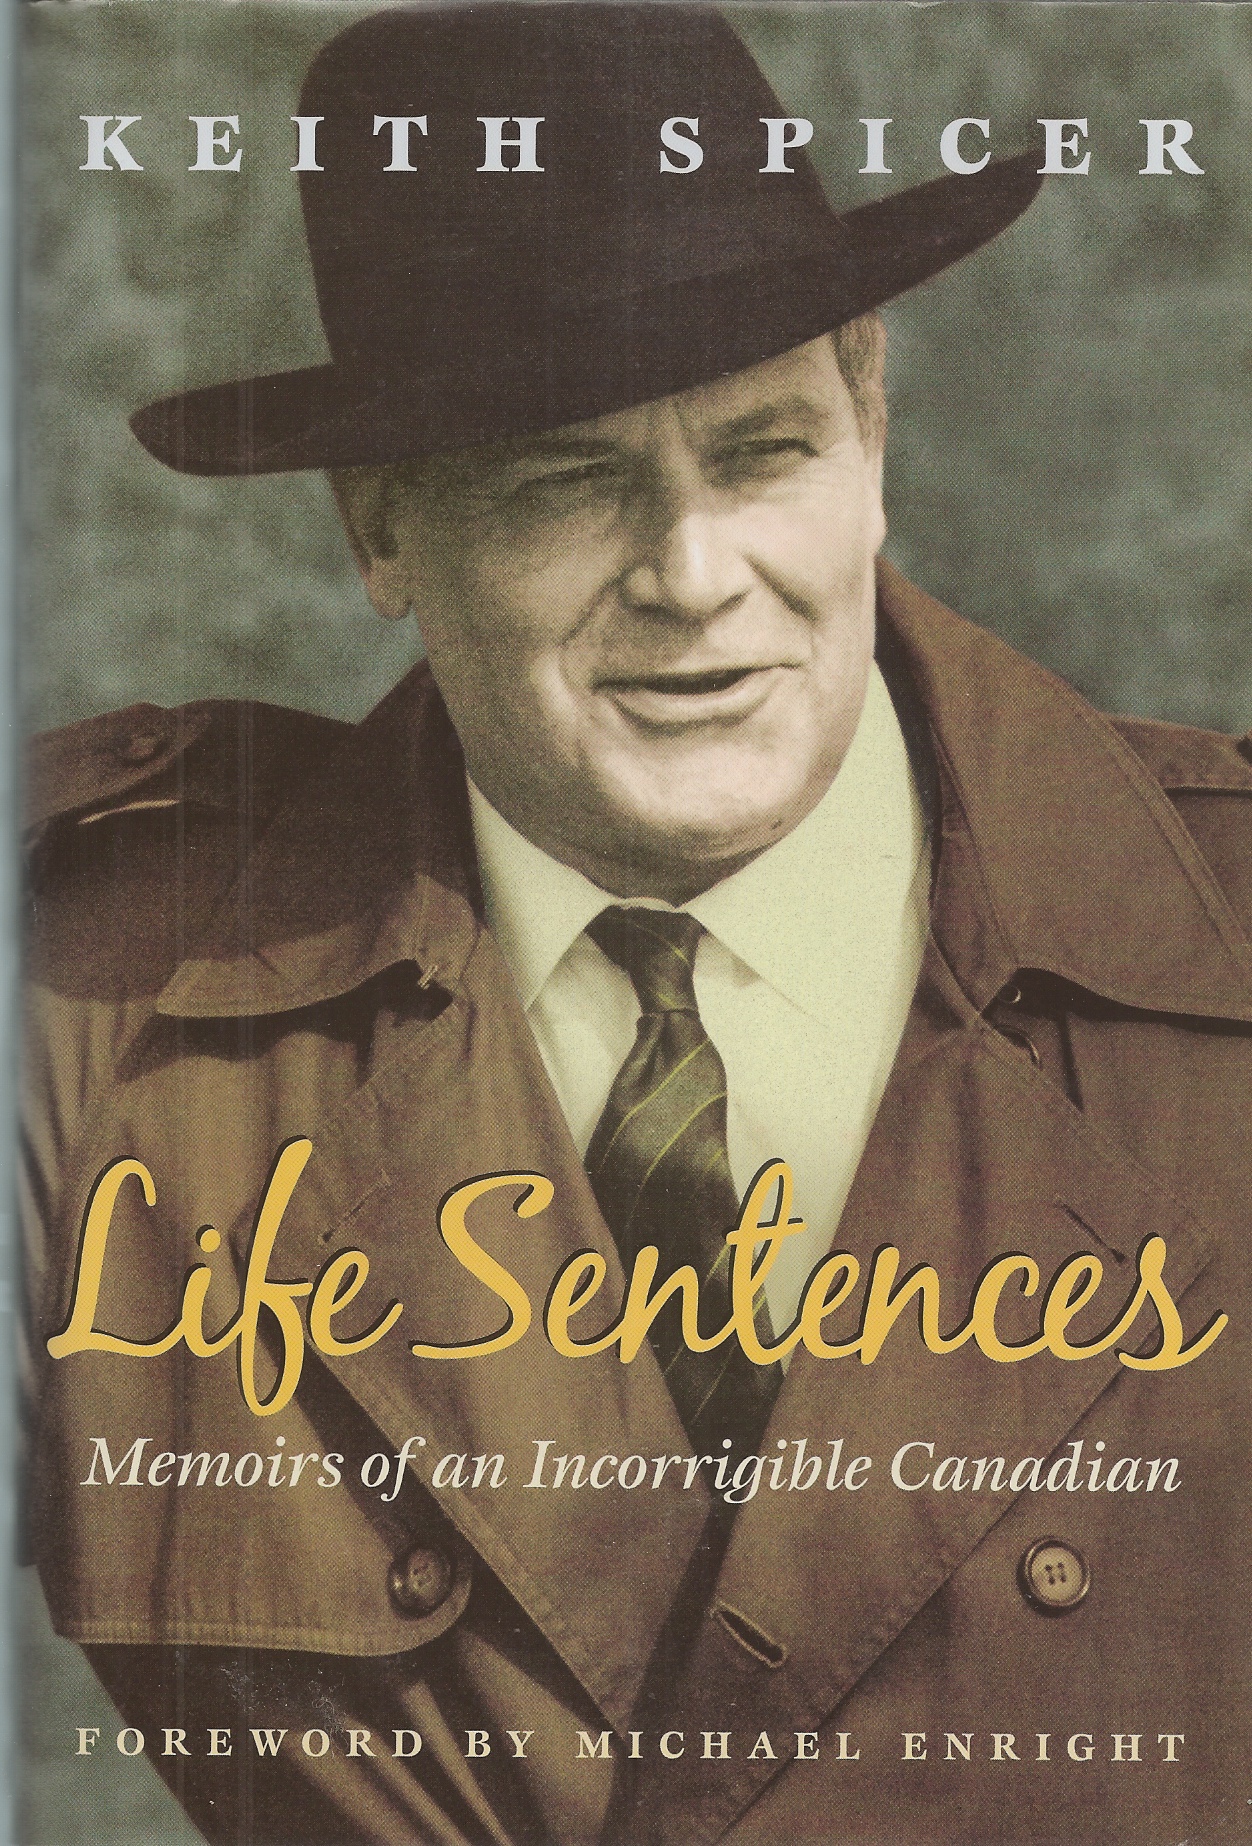 SPICER, KEITH - Life Sentences ** Signed ** Memoirs of an Incorrigible Canadian